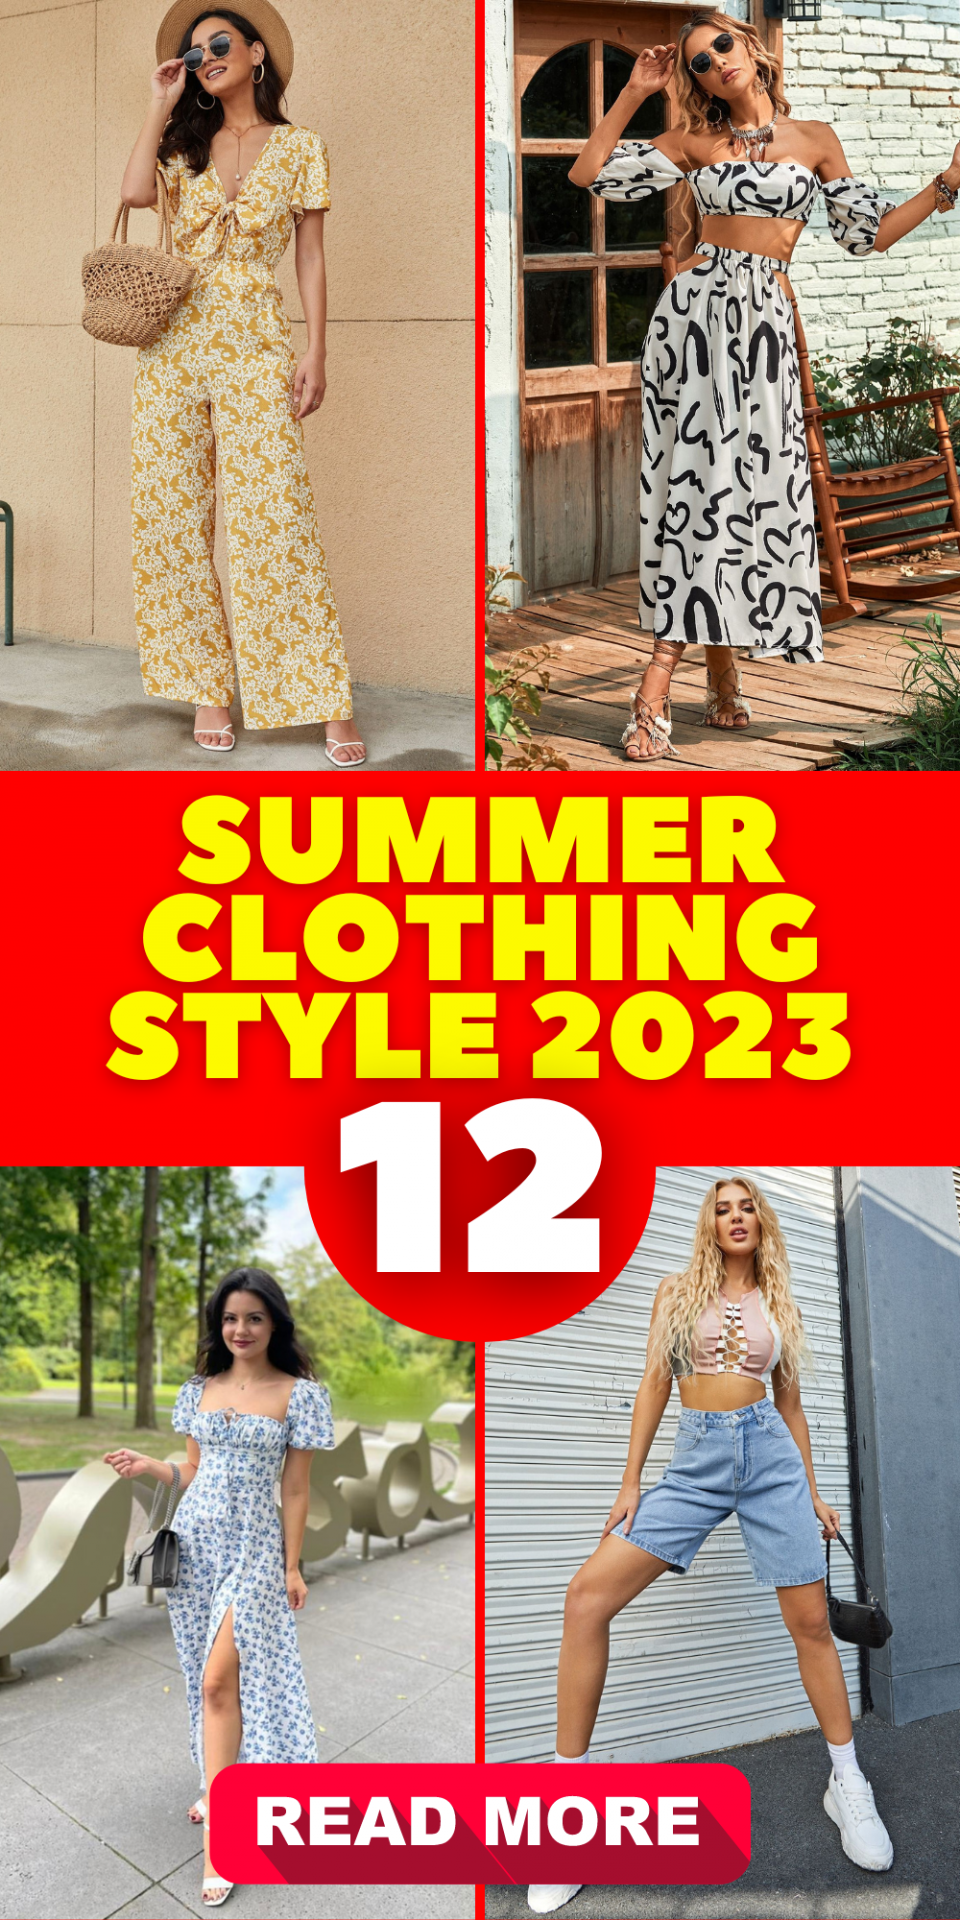 Summer Clothing Style 2023 12 Ideas: How to Stay Fashionable and Comfortable